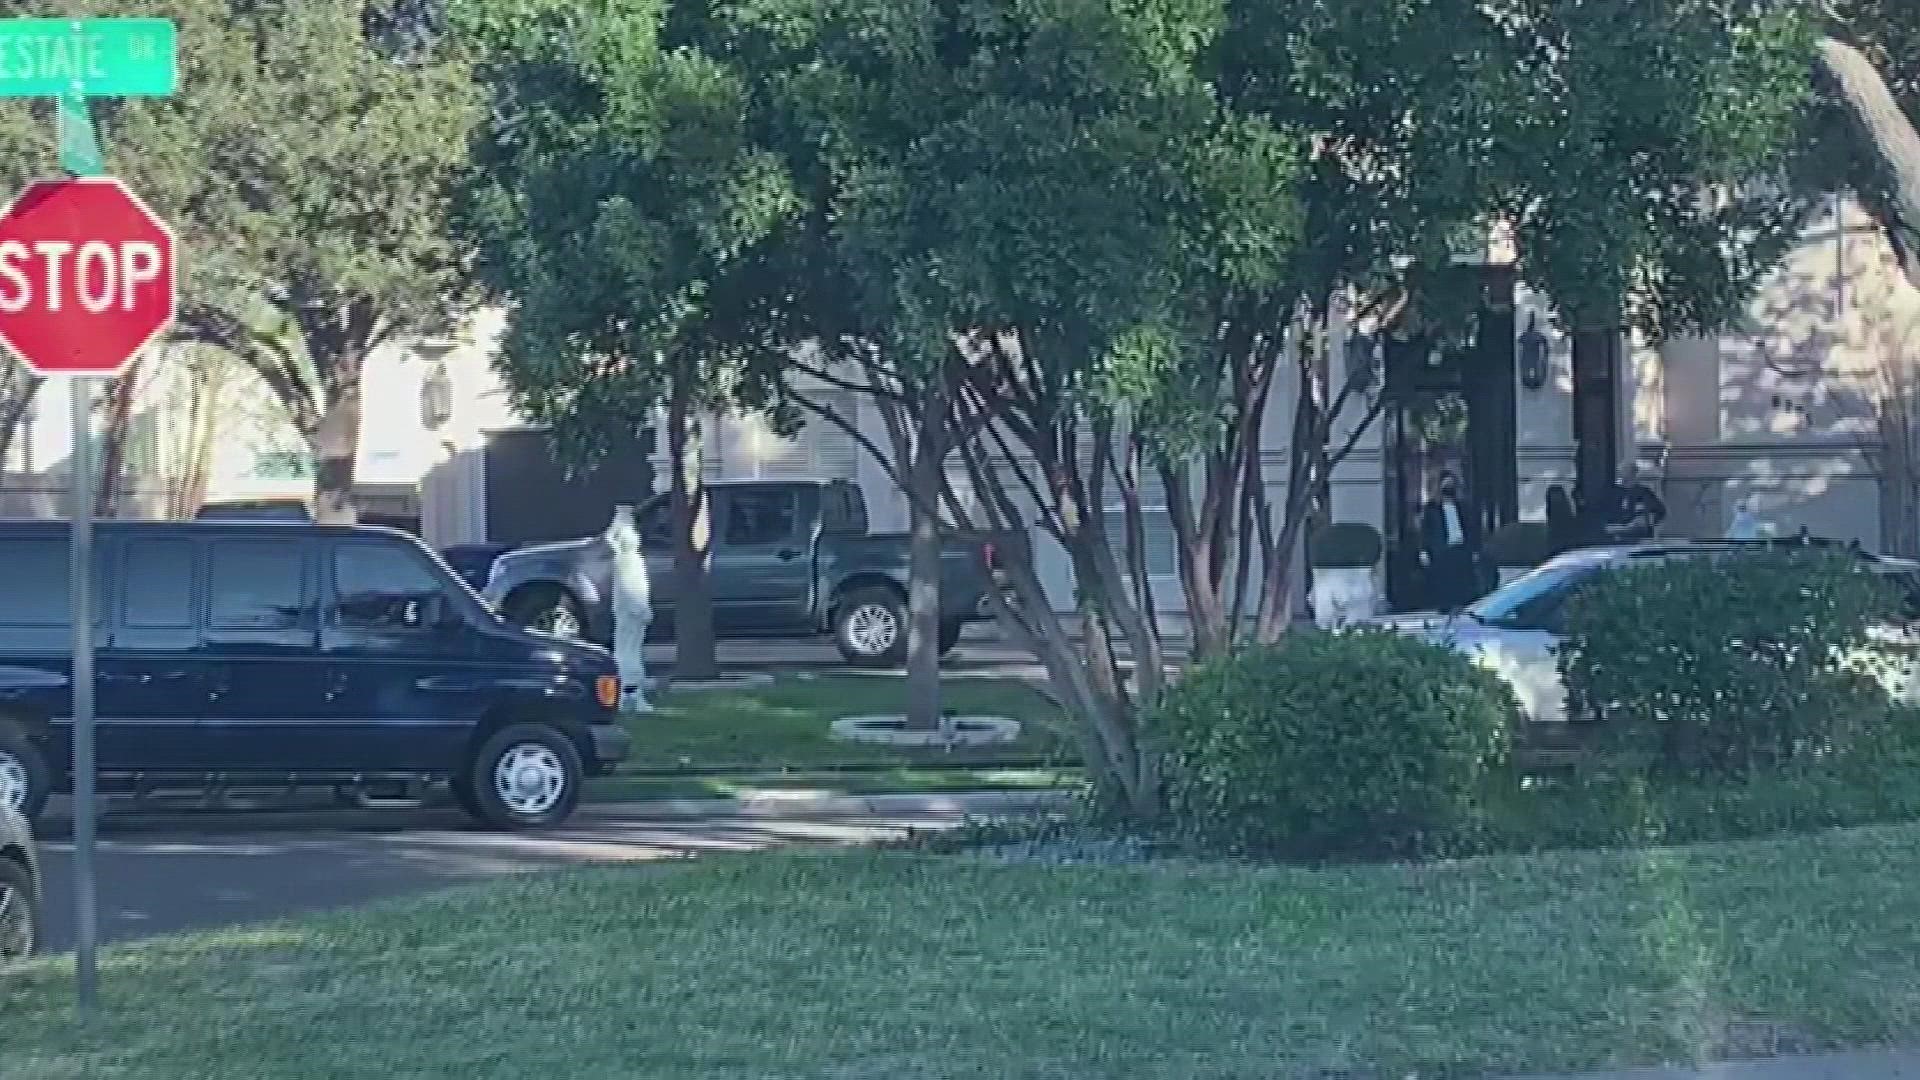 An FBI spokesperson said the agency was present on two streets around Cuellar’s house in Laredo “conducting court-authorized law enforcement activity.”